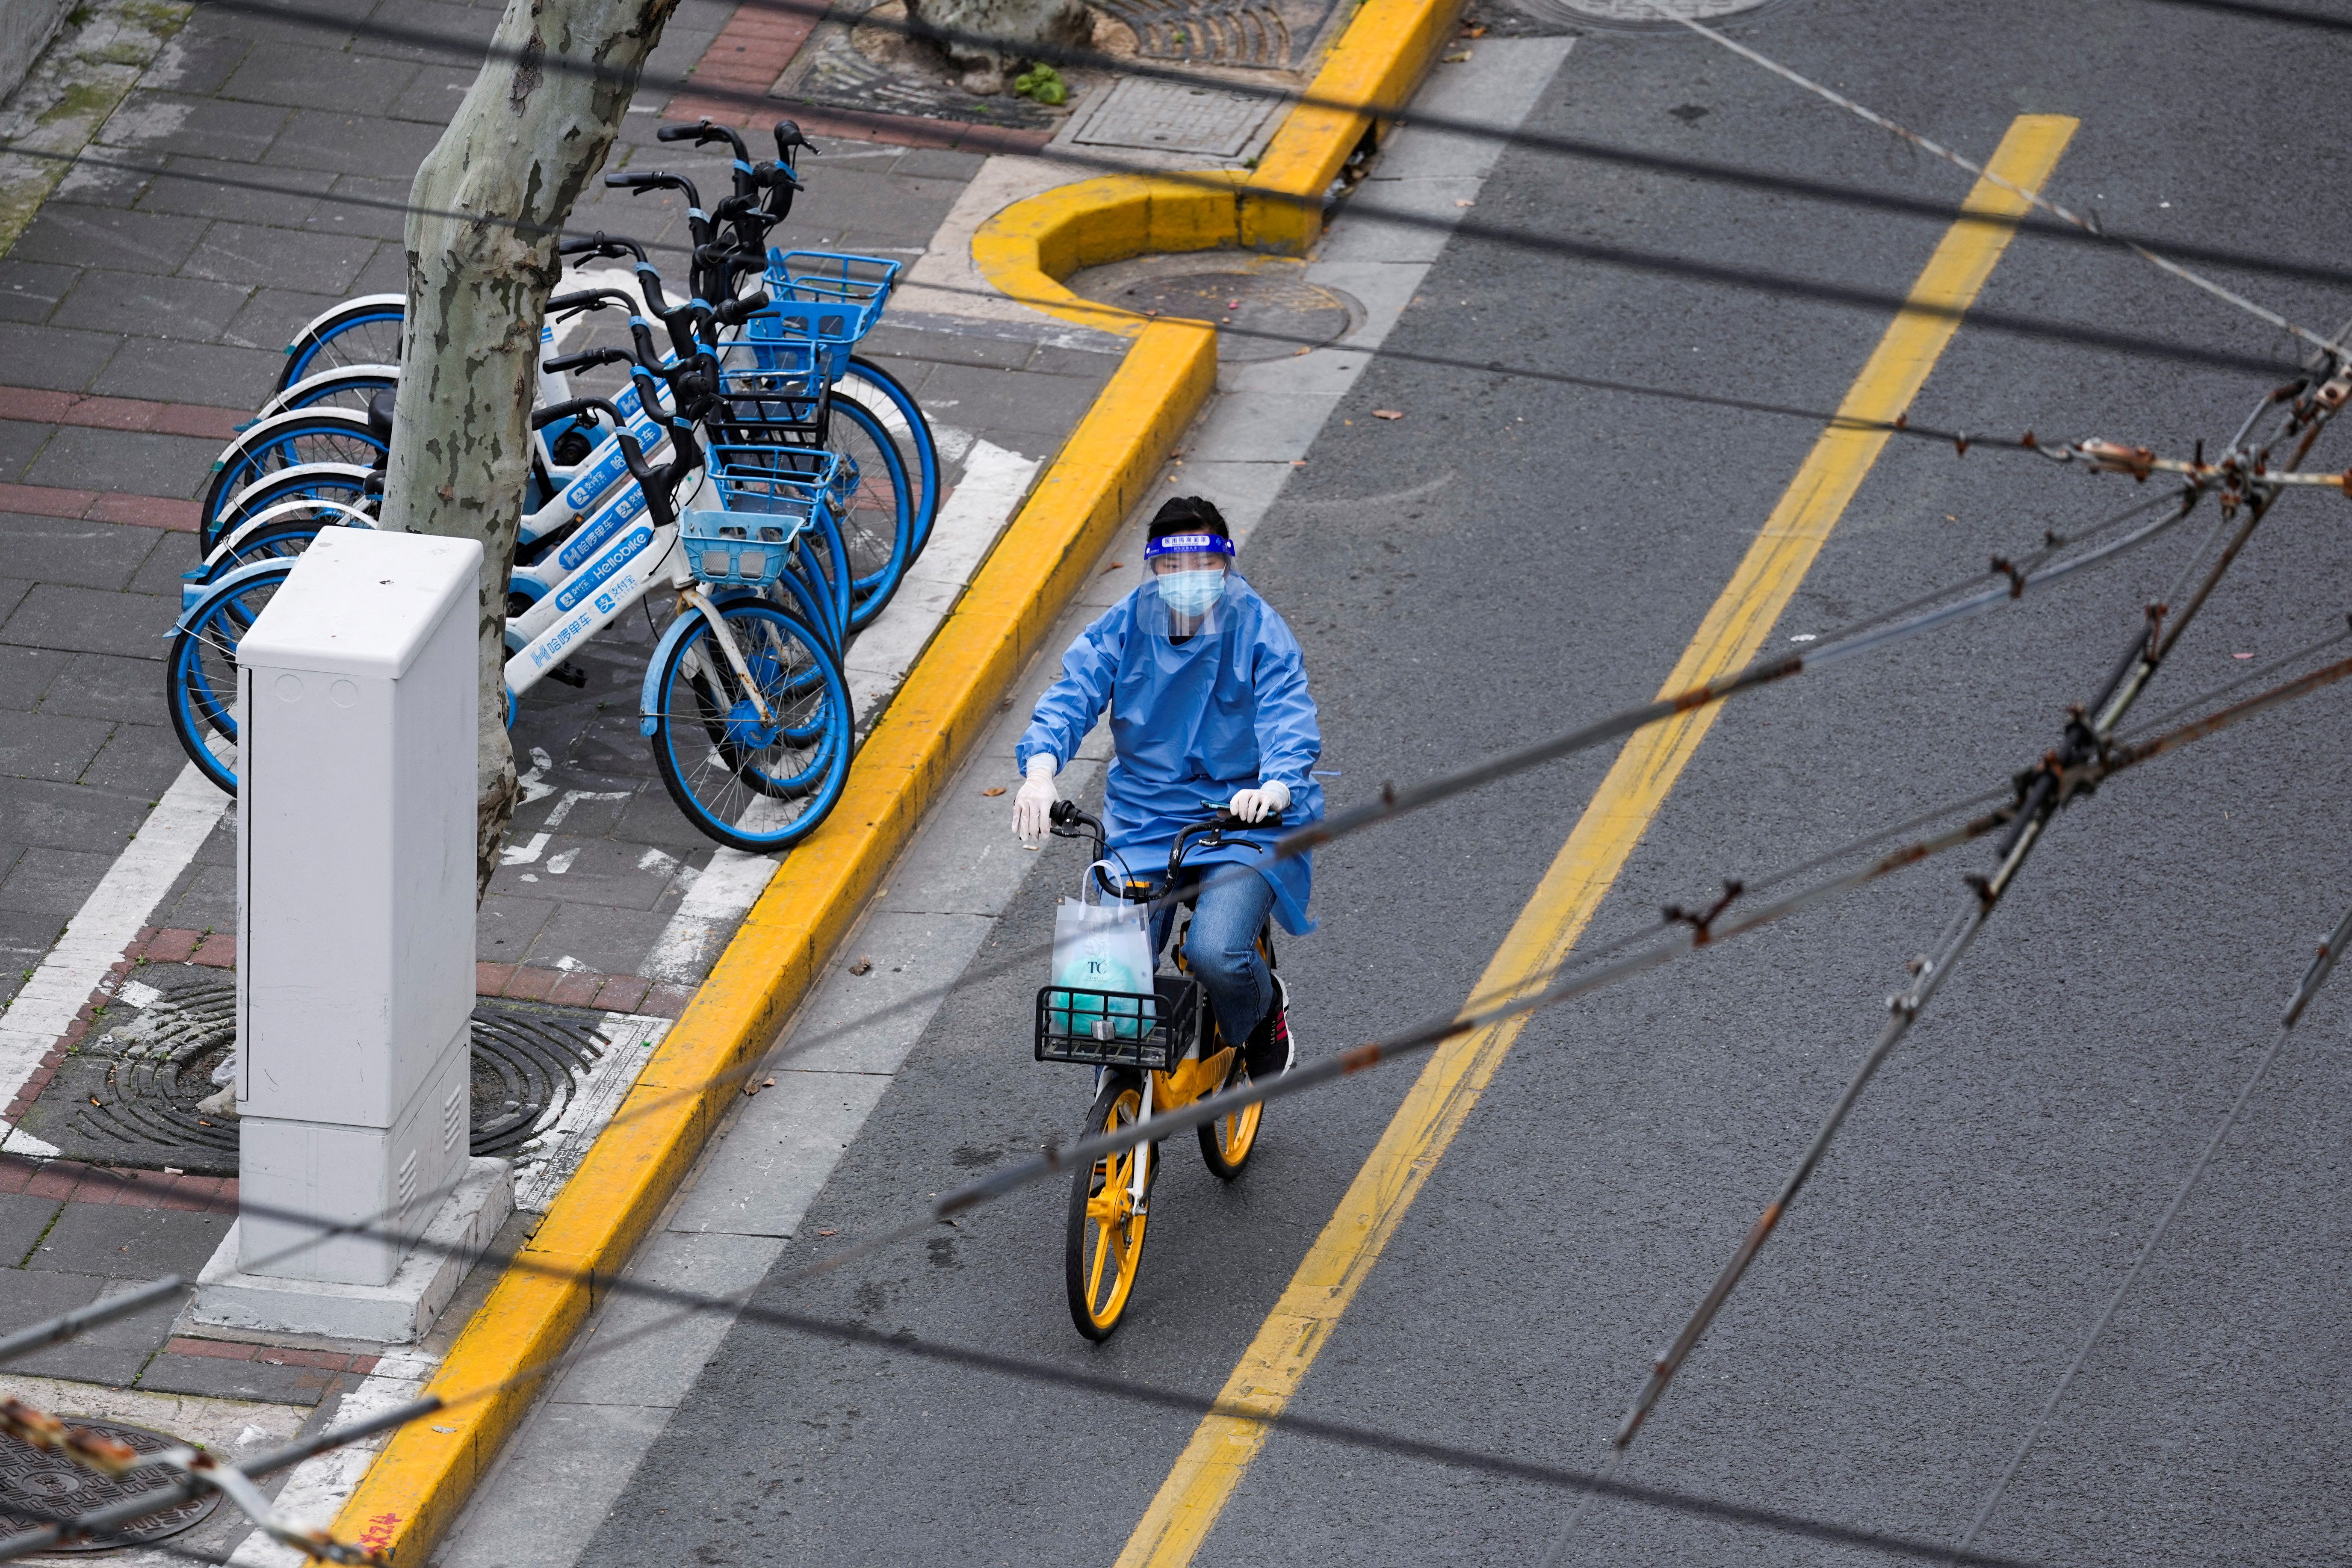 FILE PHOTO: A woman in personal protective equipment (PPE) rides a bicycle on a street, during the lockdown to curb the spread of the coronavirus disease (COVID-19) in Shanghai, China, April 5, 2022. REUTERS/Aly Song/File Photo